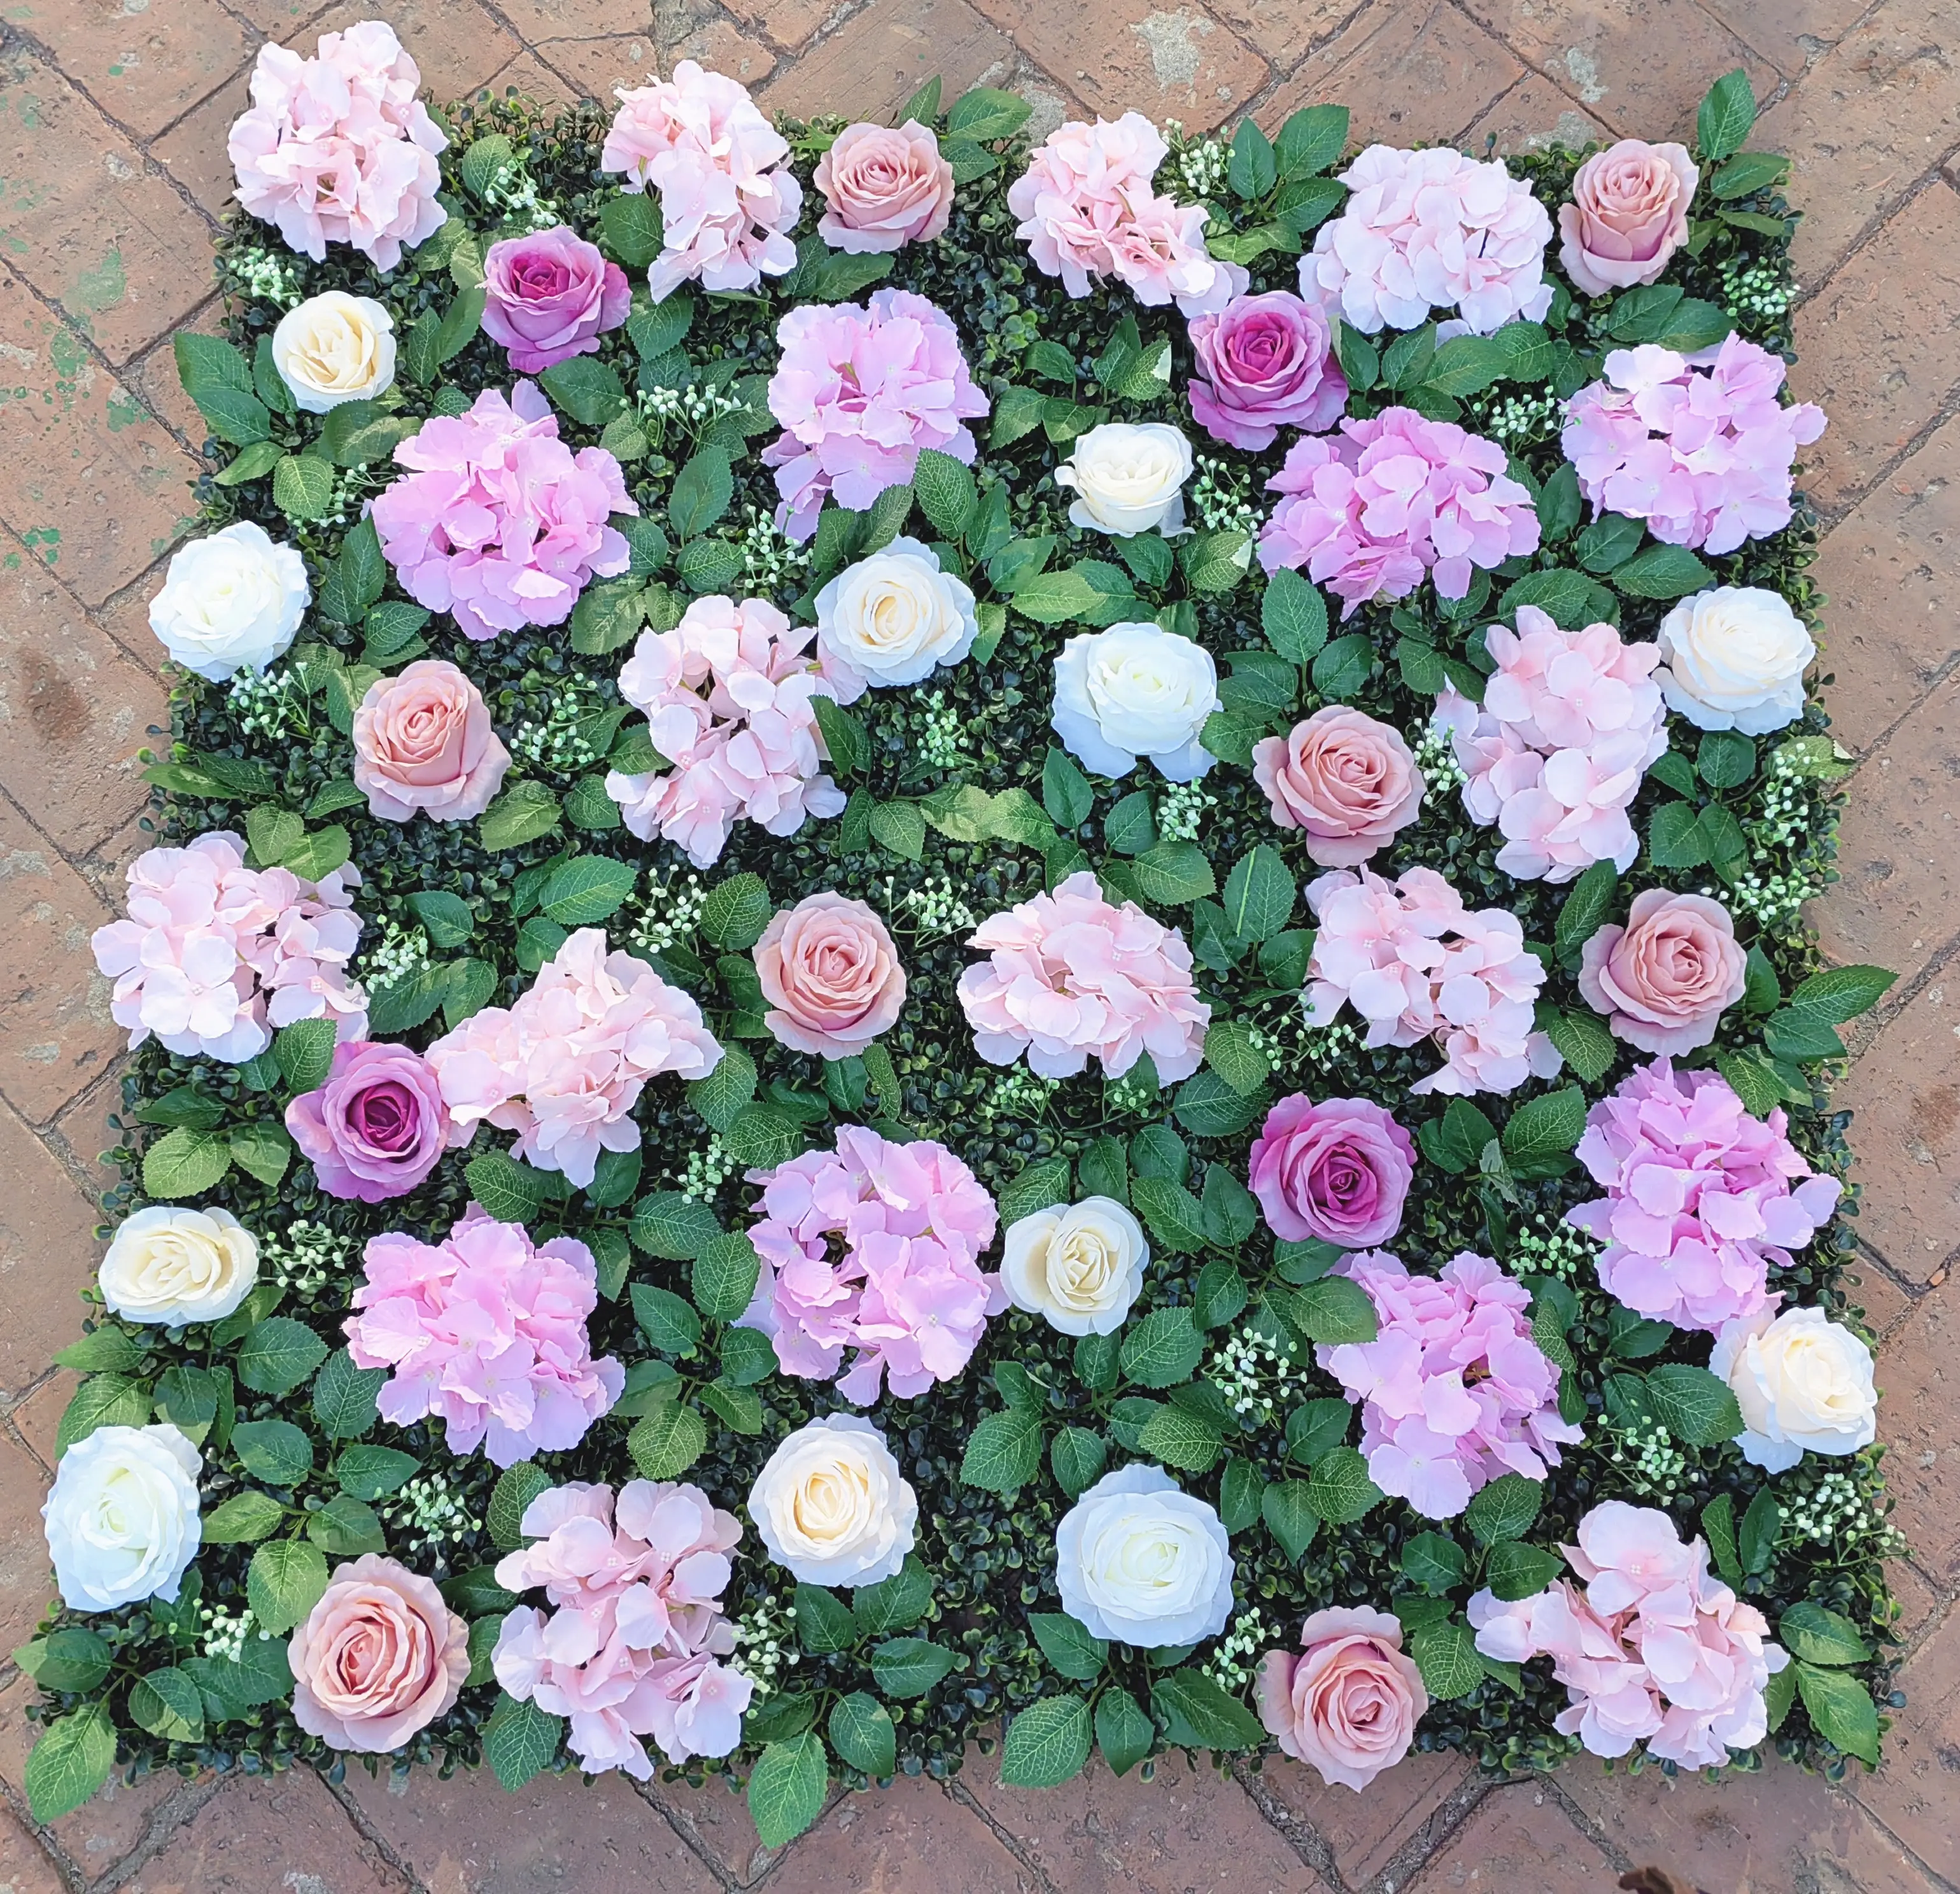 Wholesale Artificial Fabric Artificial Roll Pink White Flower Wall Backdrop Panels Wall for Wedding Event Decorations